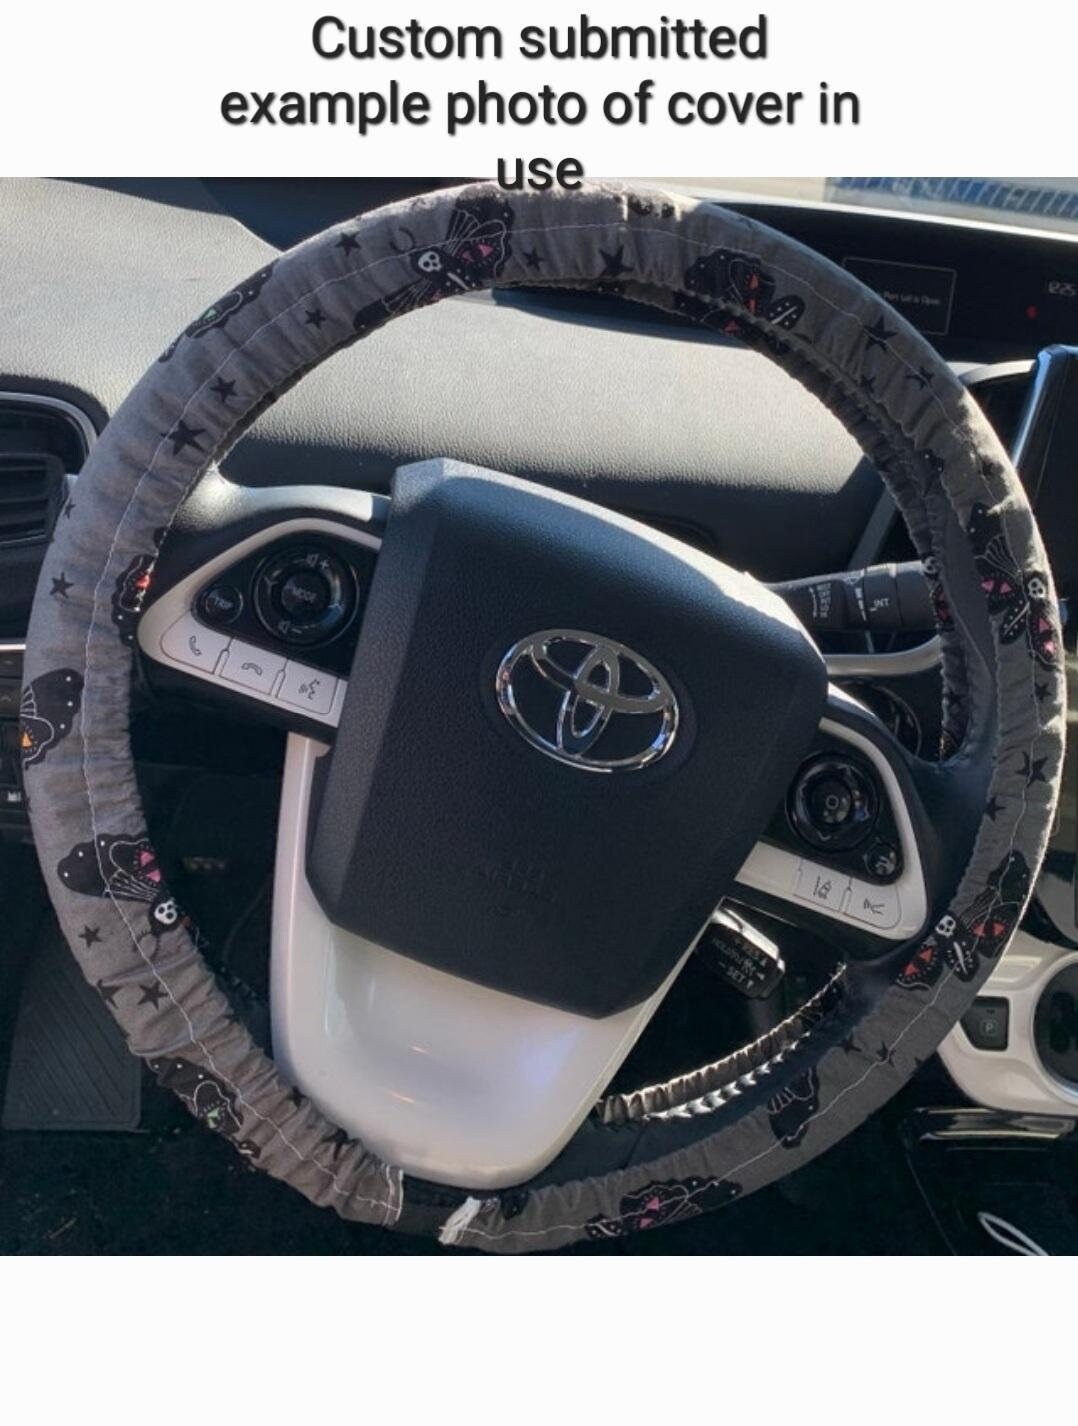 Beauty Princess Steering Wheel Cover made with Licensed Disney Fabric, Handmade - Harlow's Store and Garden Gifts